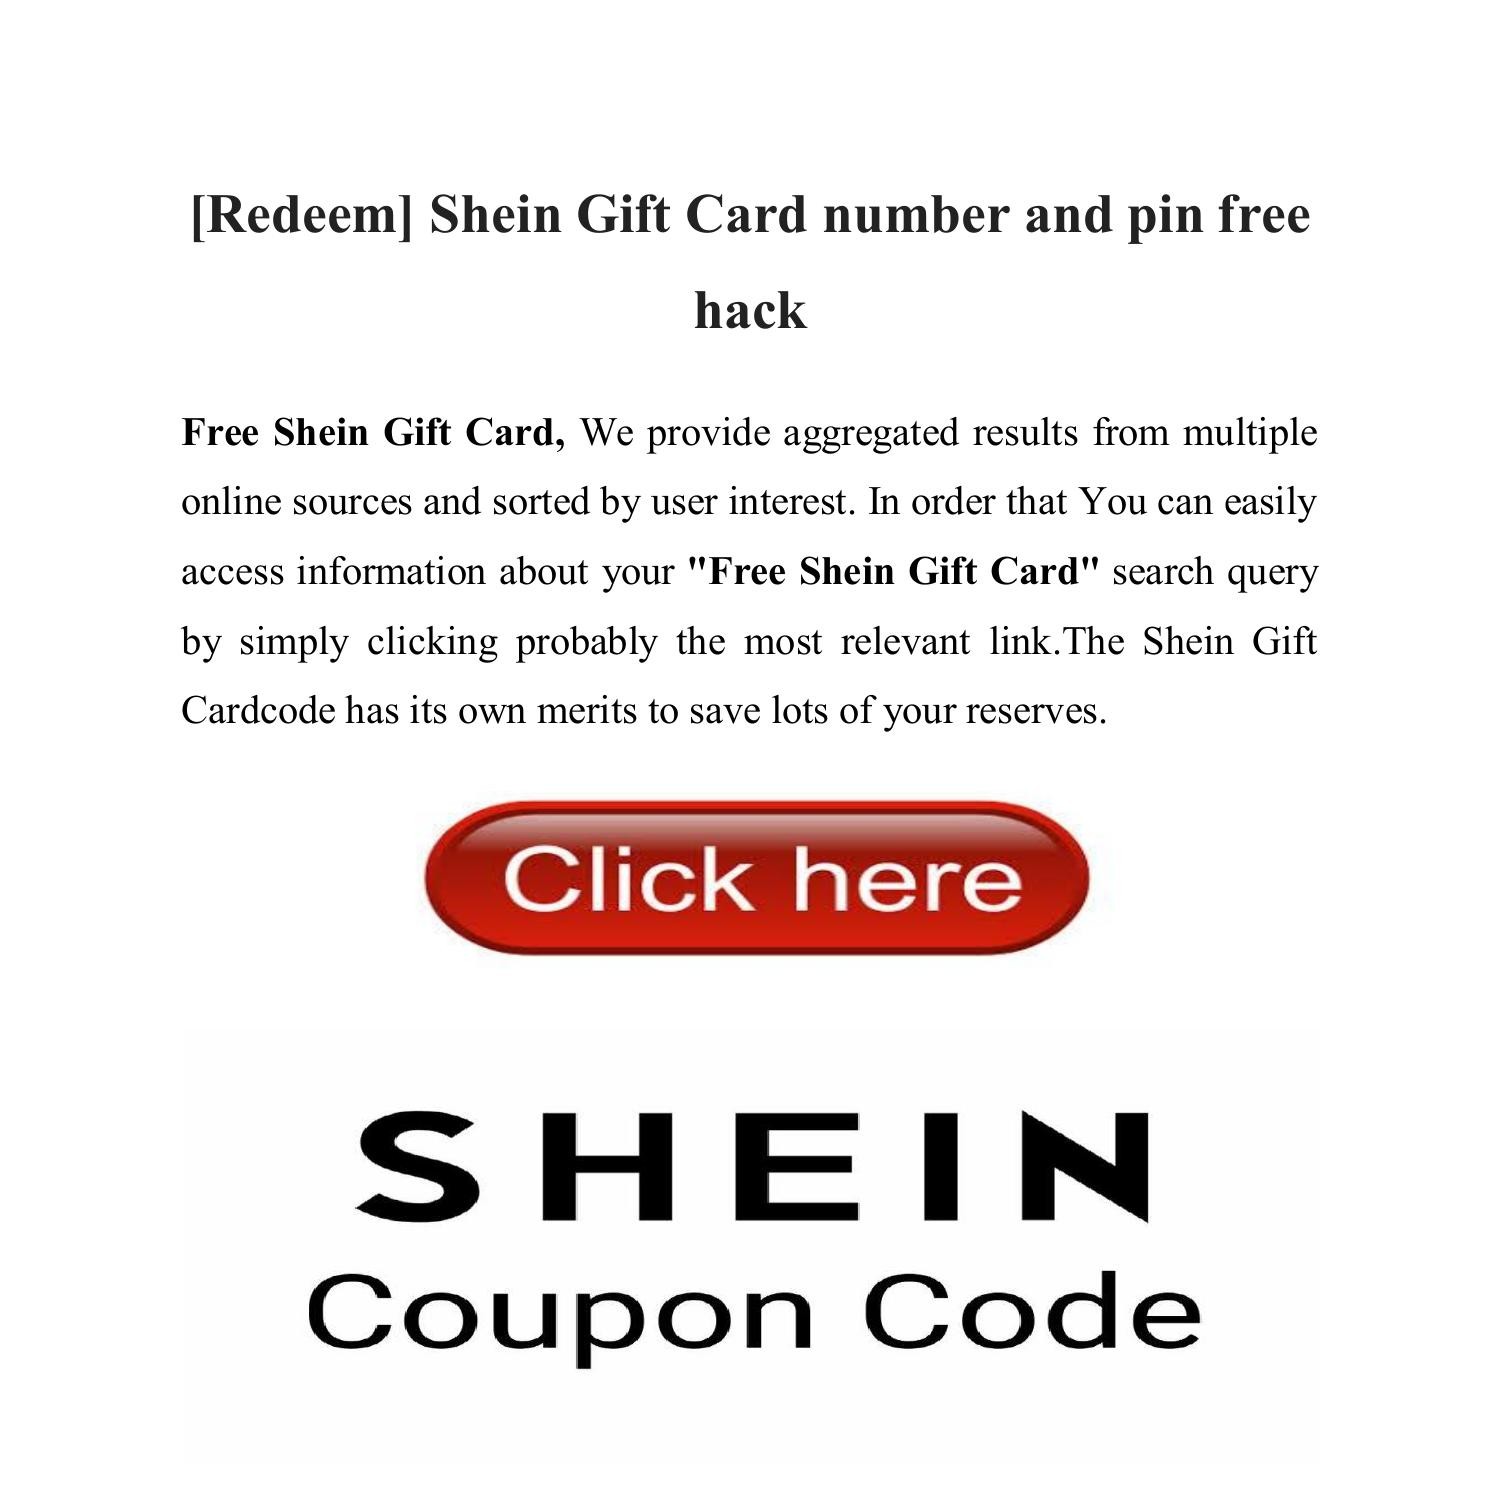 redeem shein gift card number and pin free hack pdf